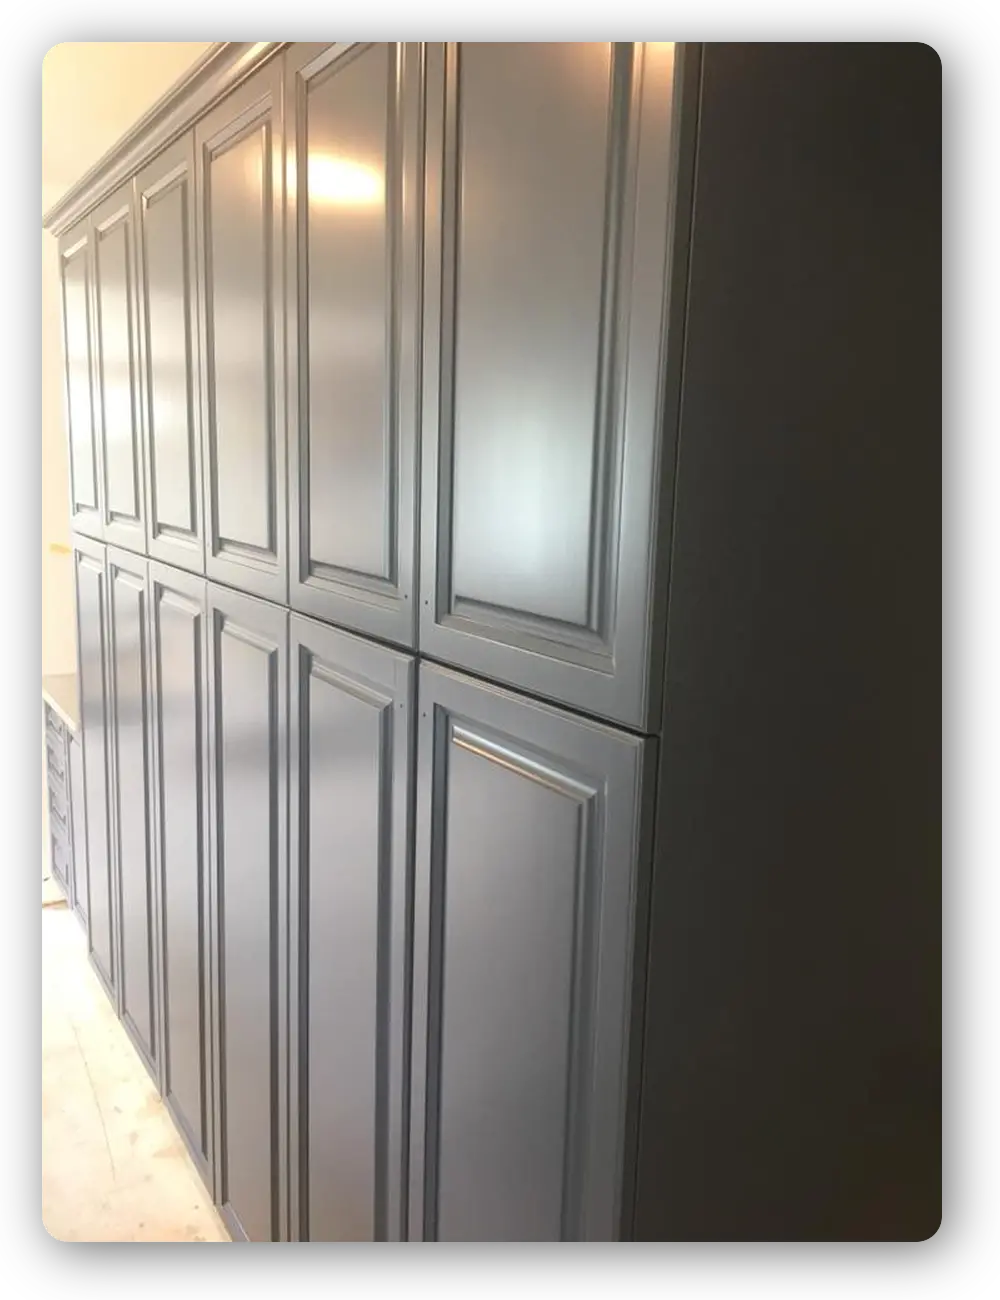 Hale Navy Cabinets